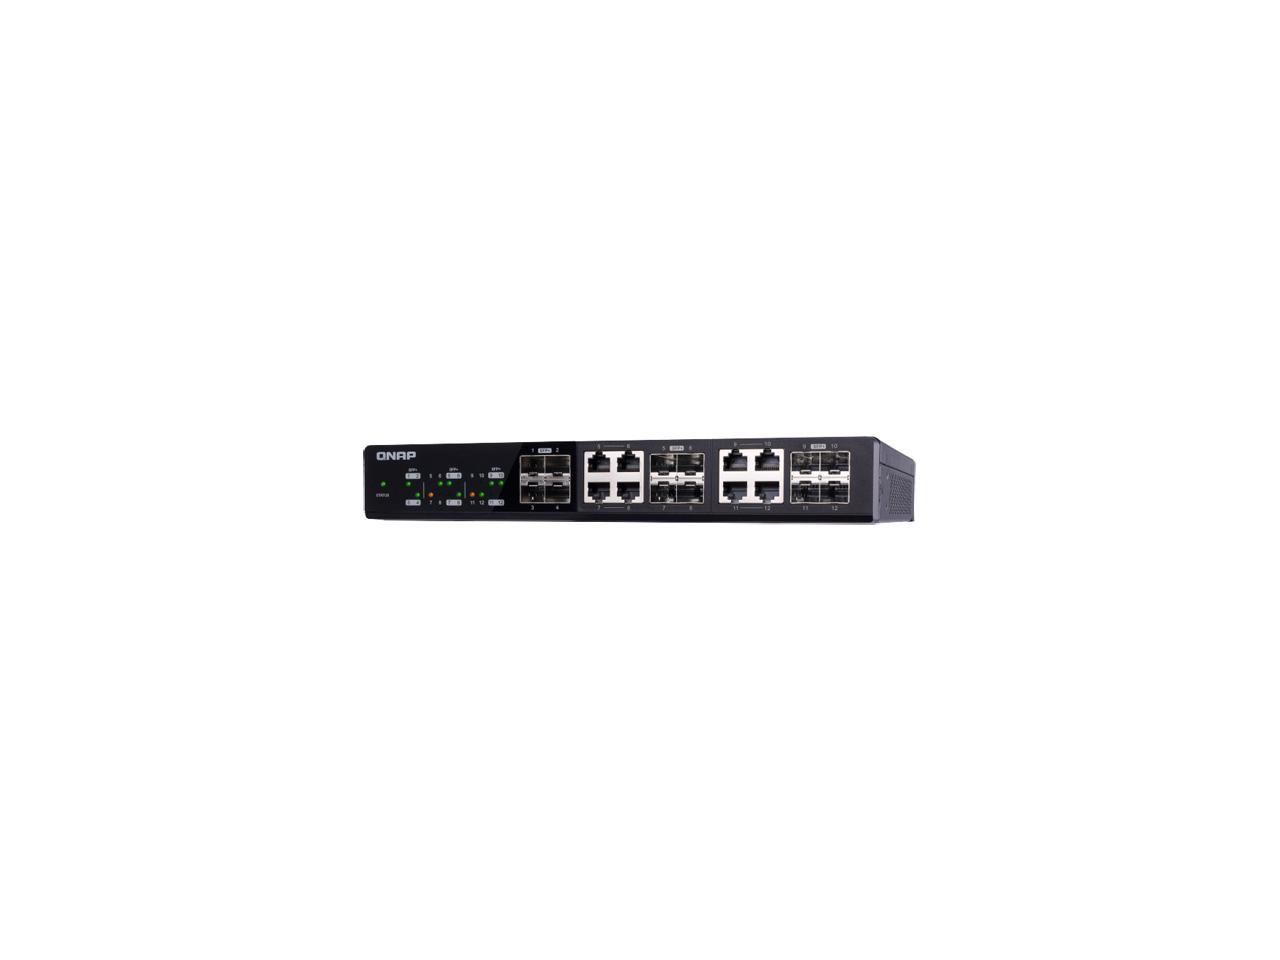 QNAP QSW-1208-8C 12-Port Unmanaged 10 GbE Switch. Twelve 10 GbE SFP+ Ports with Shared Eight 10GBASE-T Ports